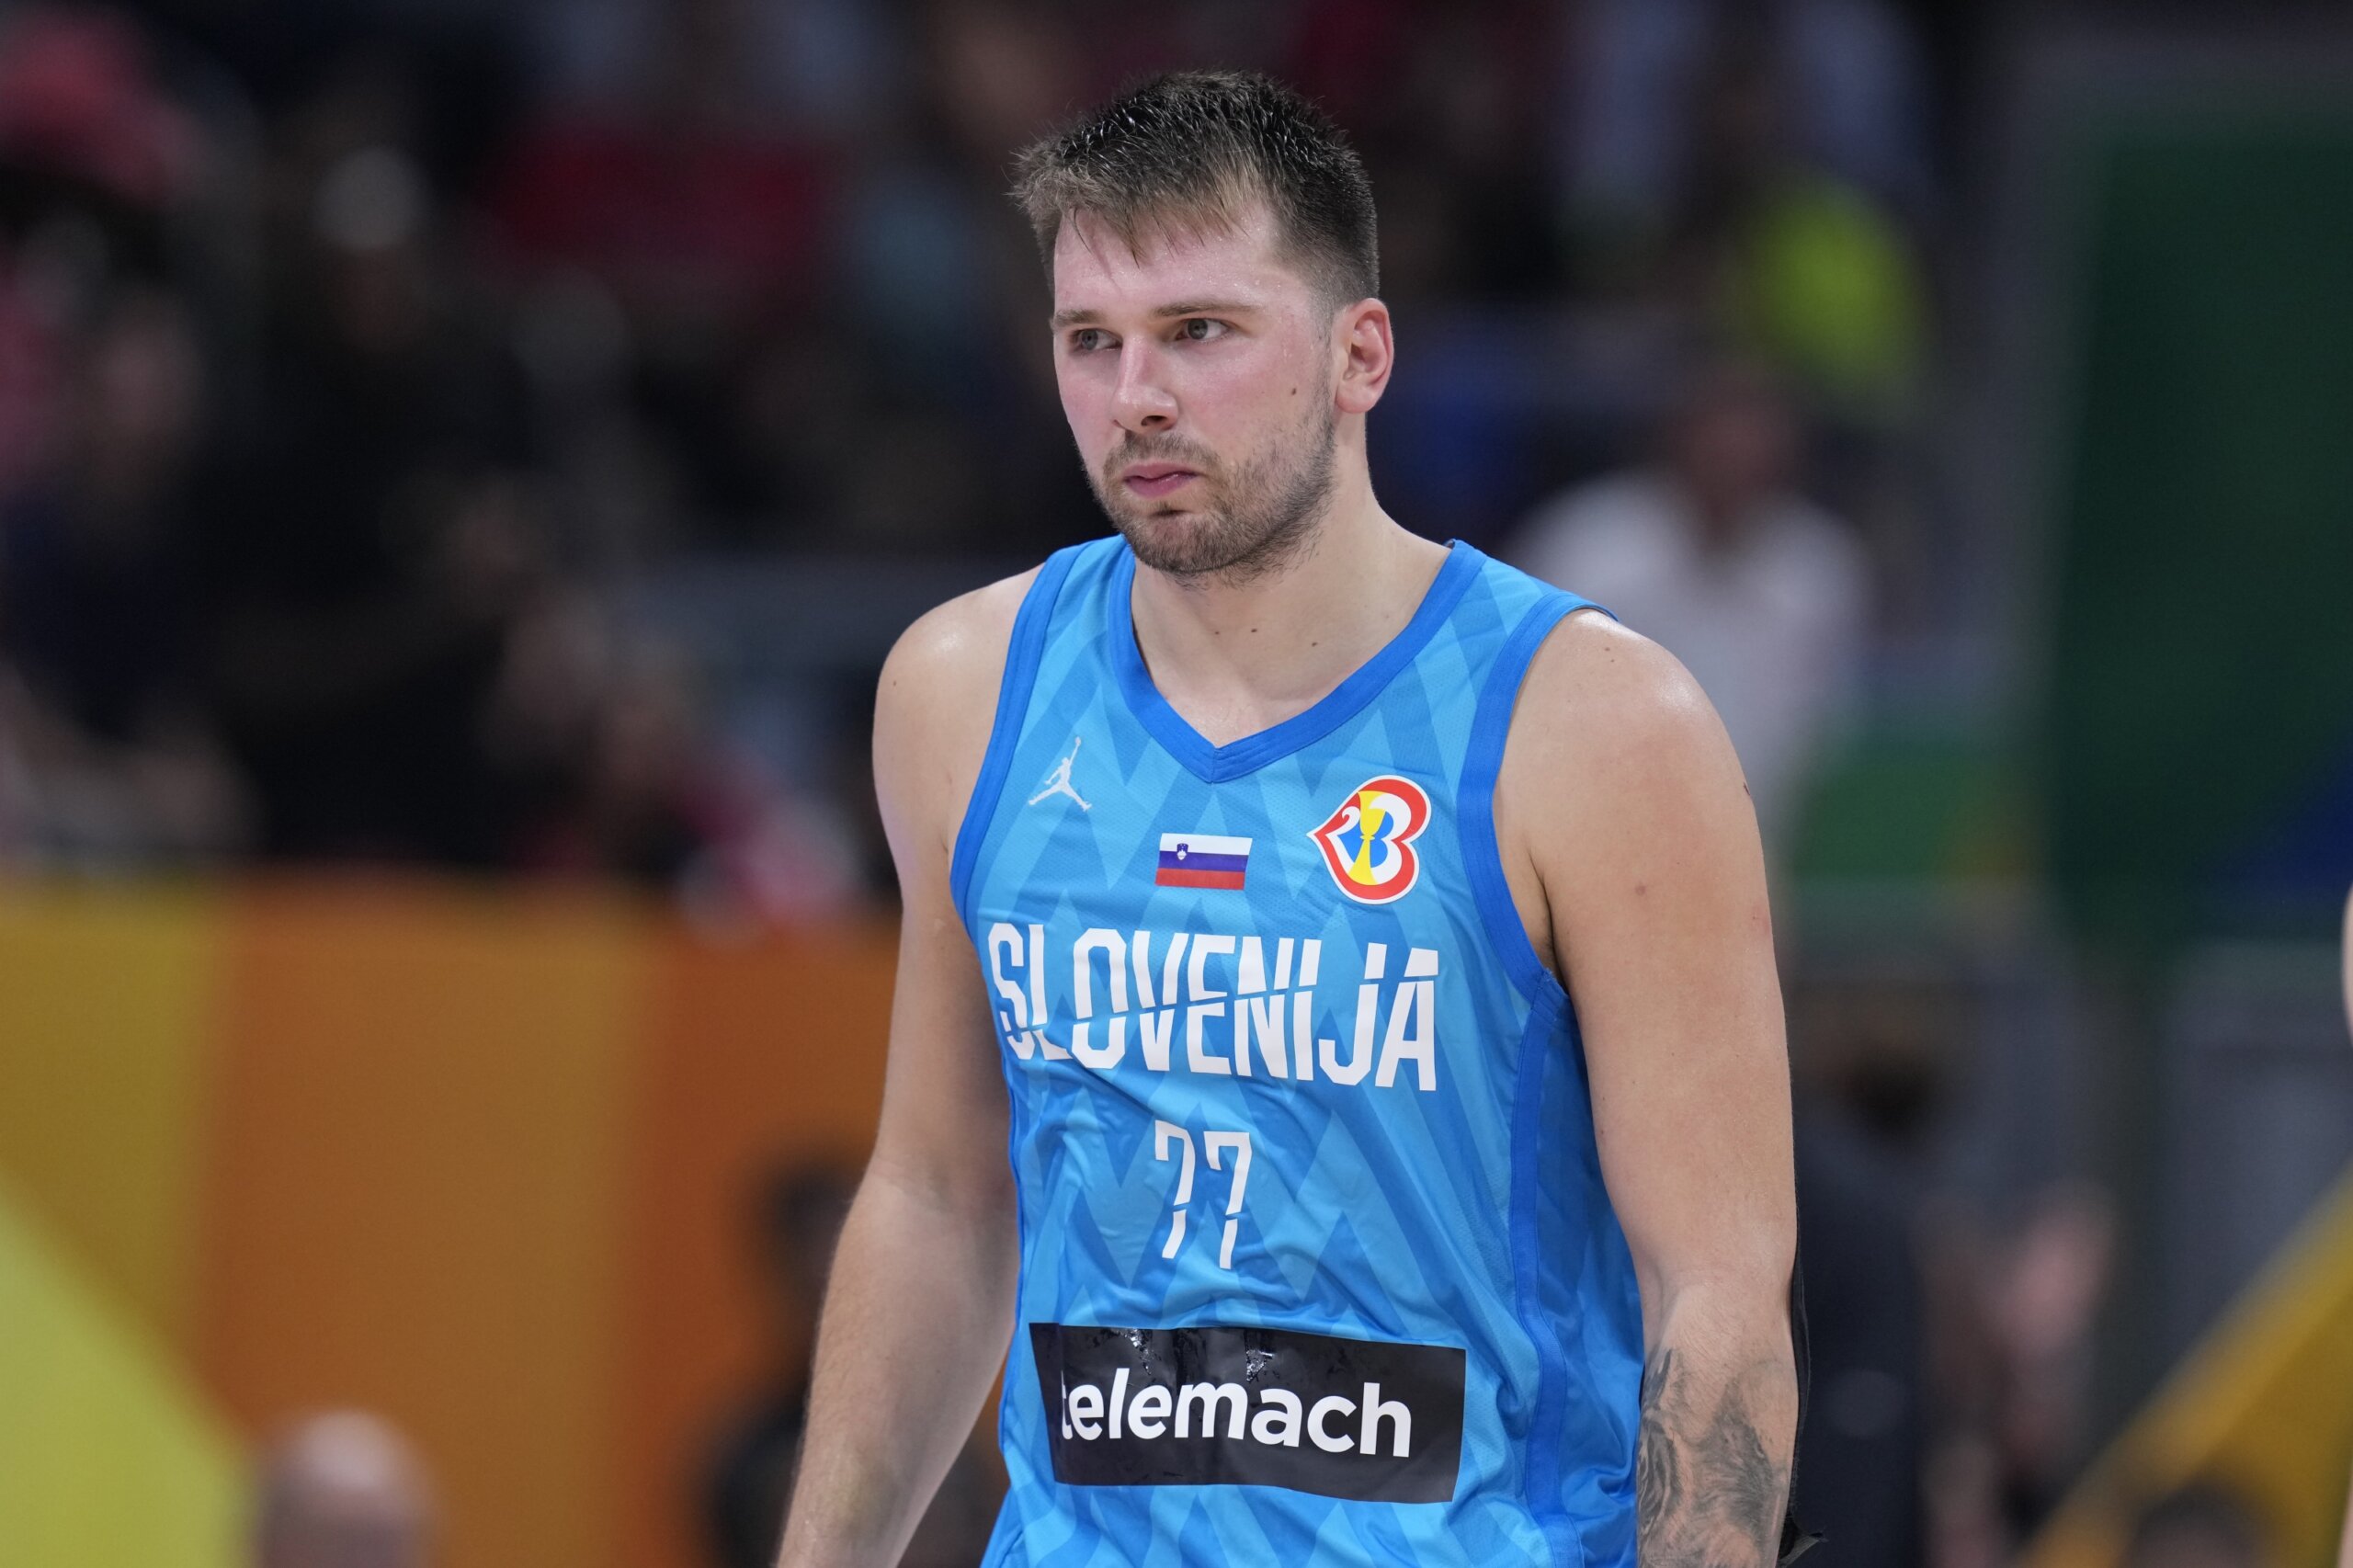 Slovenia clinches place in 2023 FIBA World Cup without Luka Doncic